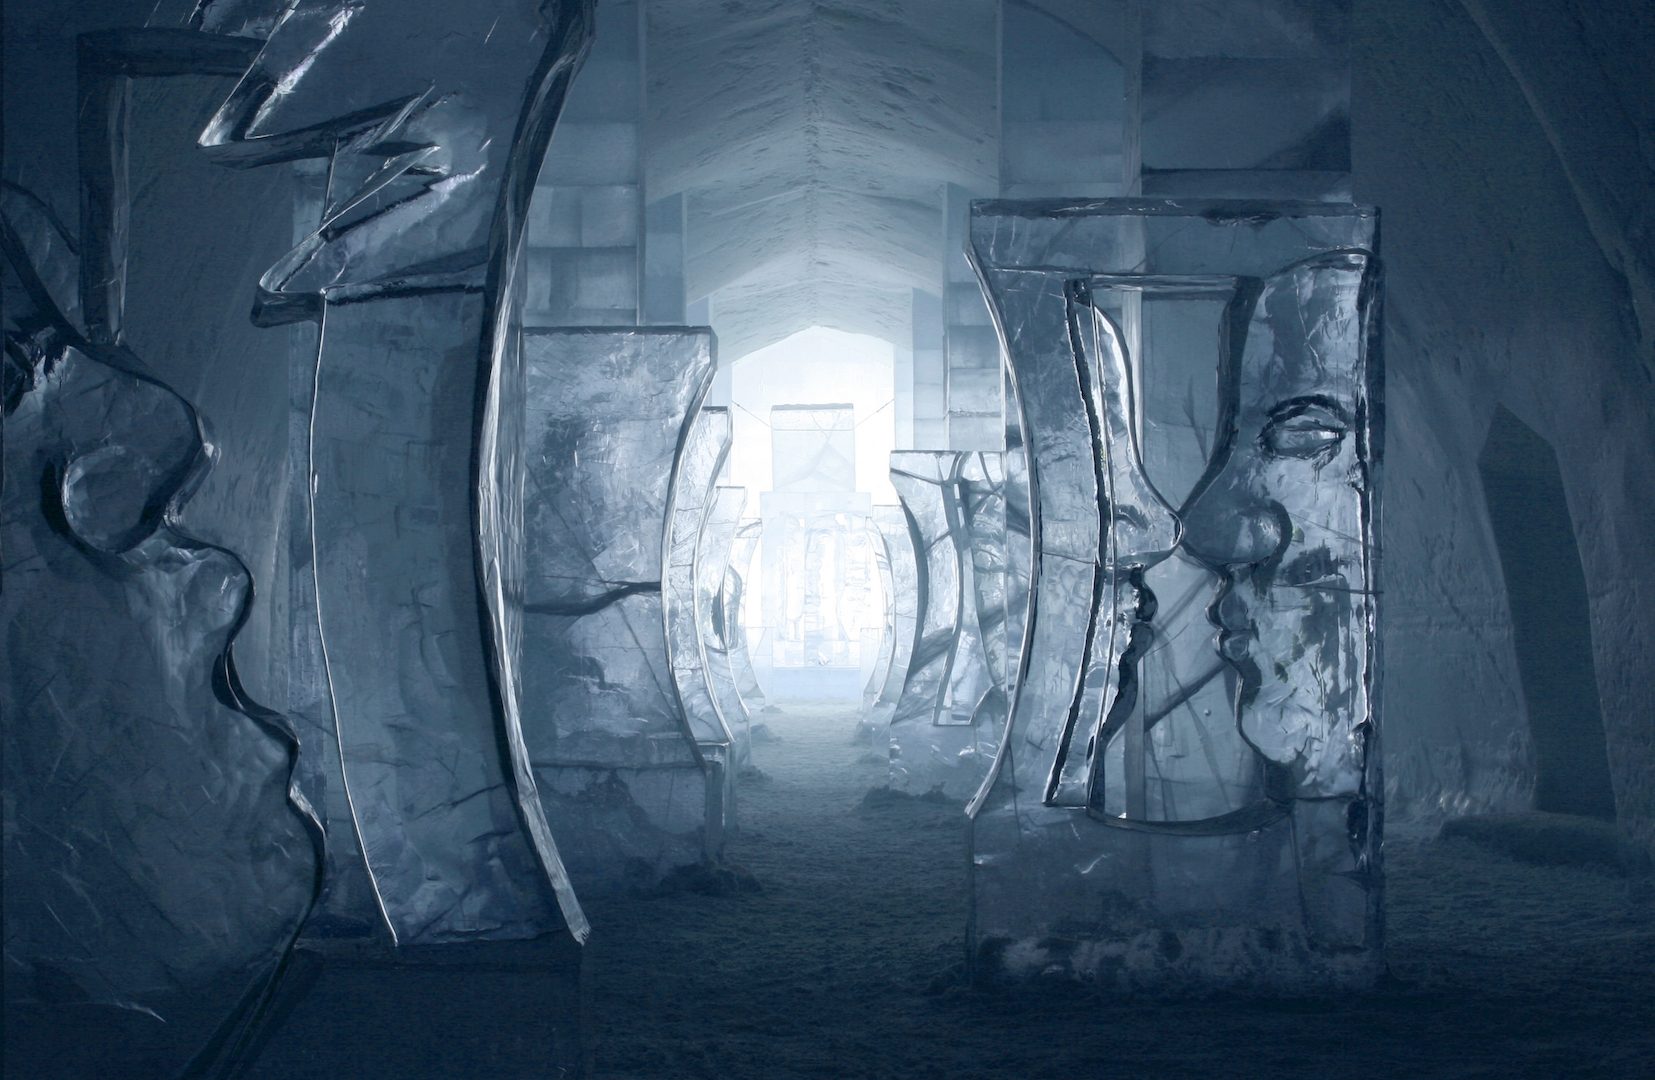 icehotel5